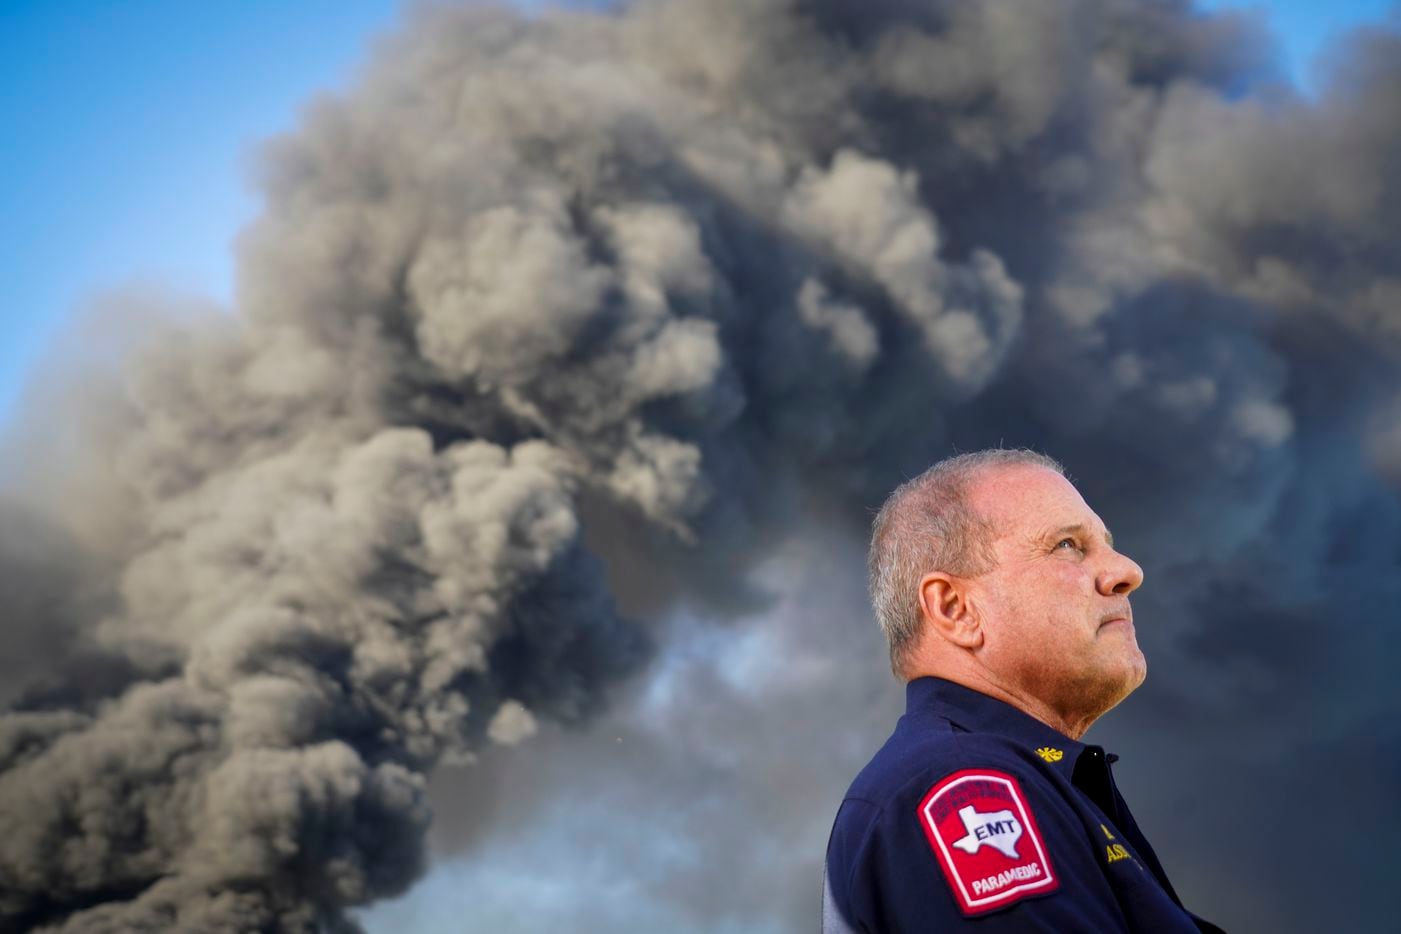 Grand Prairie Assistant Fire Chief Bill Murphy address media regarding a fire in an industrial area of Grand Prairie on Wednesday morning, Aug. 19, 2020.